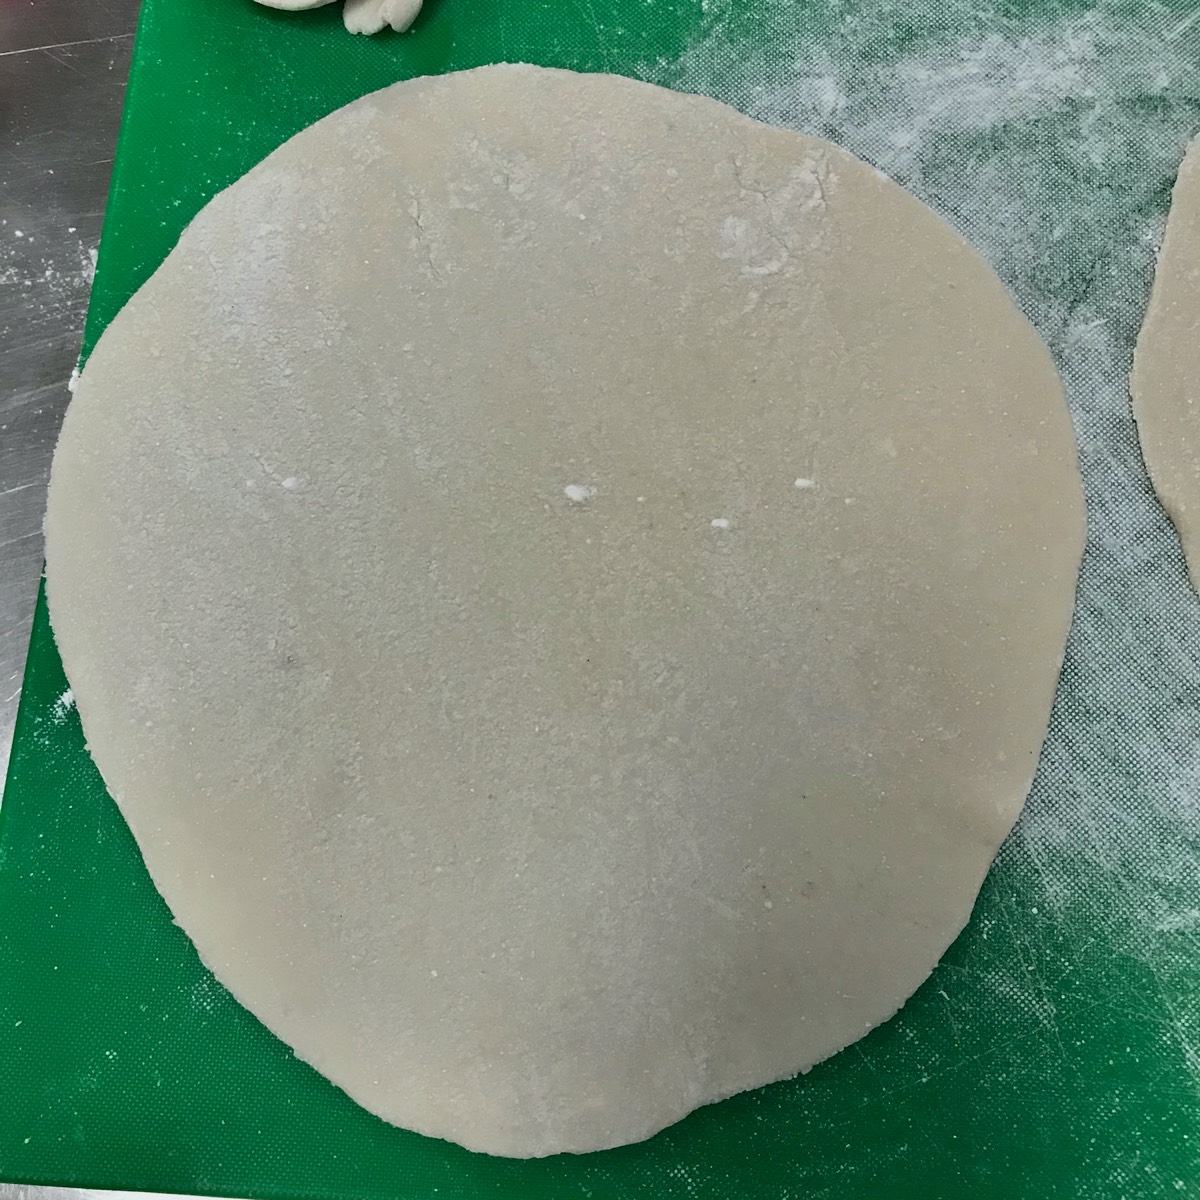 image show a circle of gluten free dough on a green cutting board